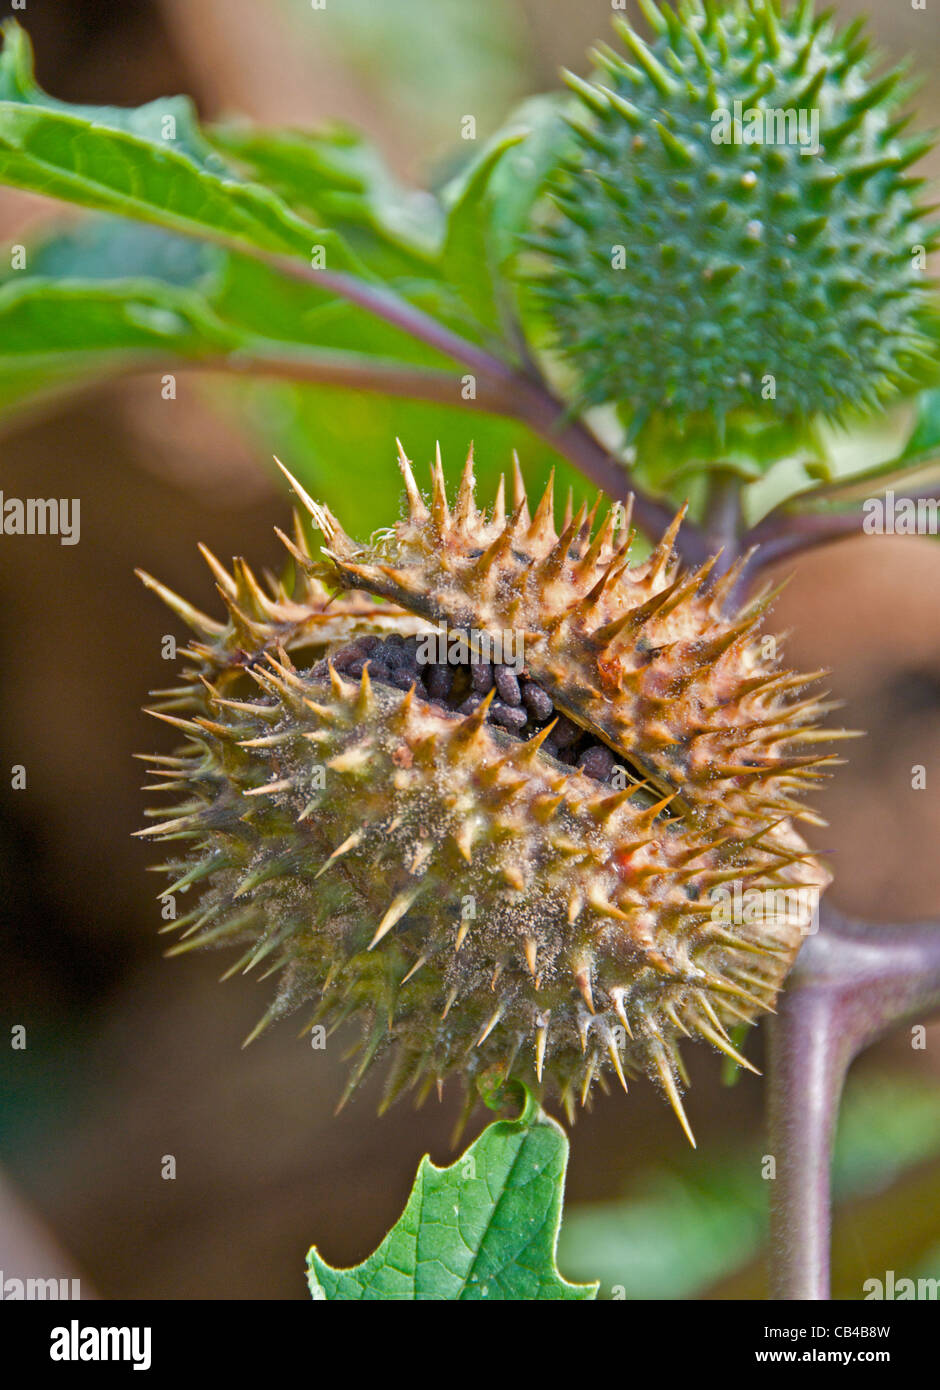 Thornapple thorn apple thorn-apple poisonous plant also known as Jimson Weed. This is the ripe seed head of the Datura stramonium. Stock Photo